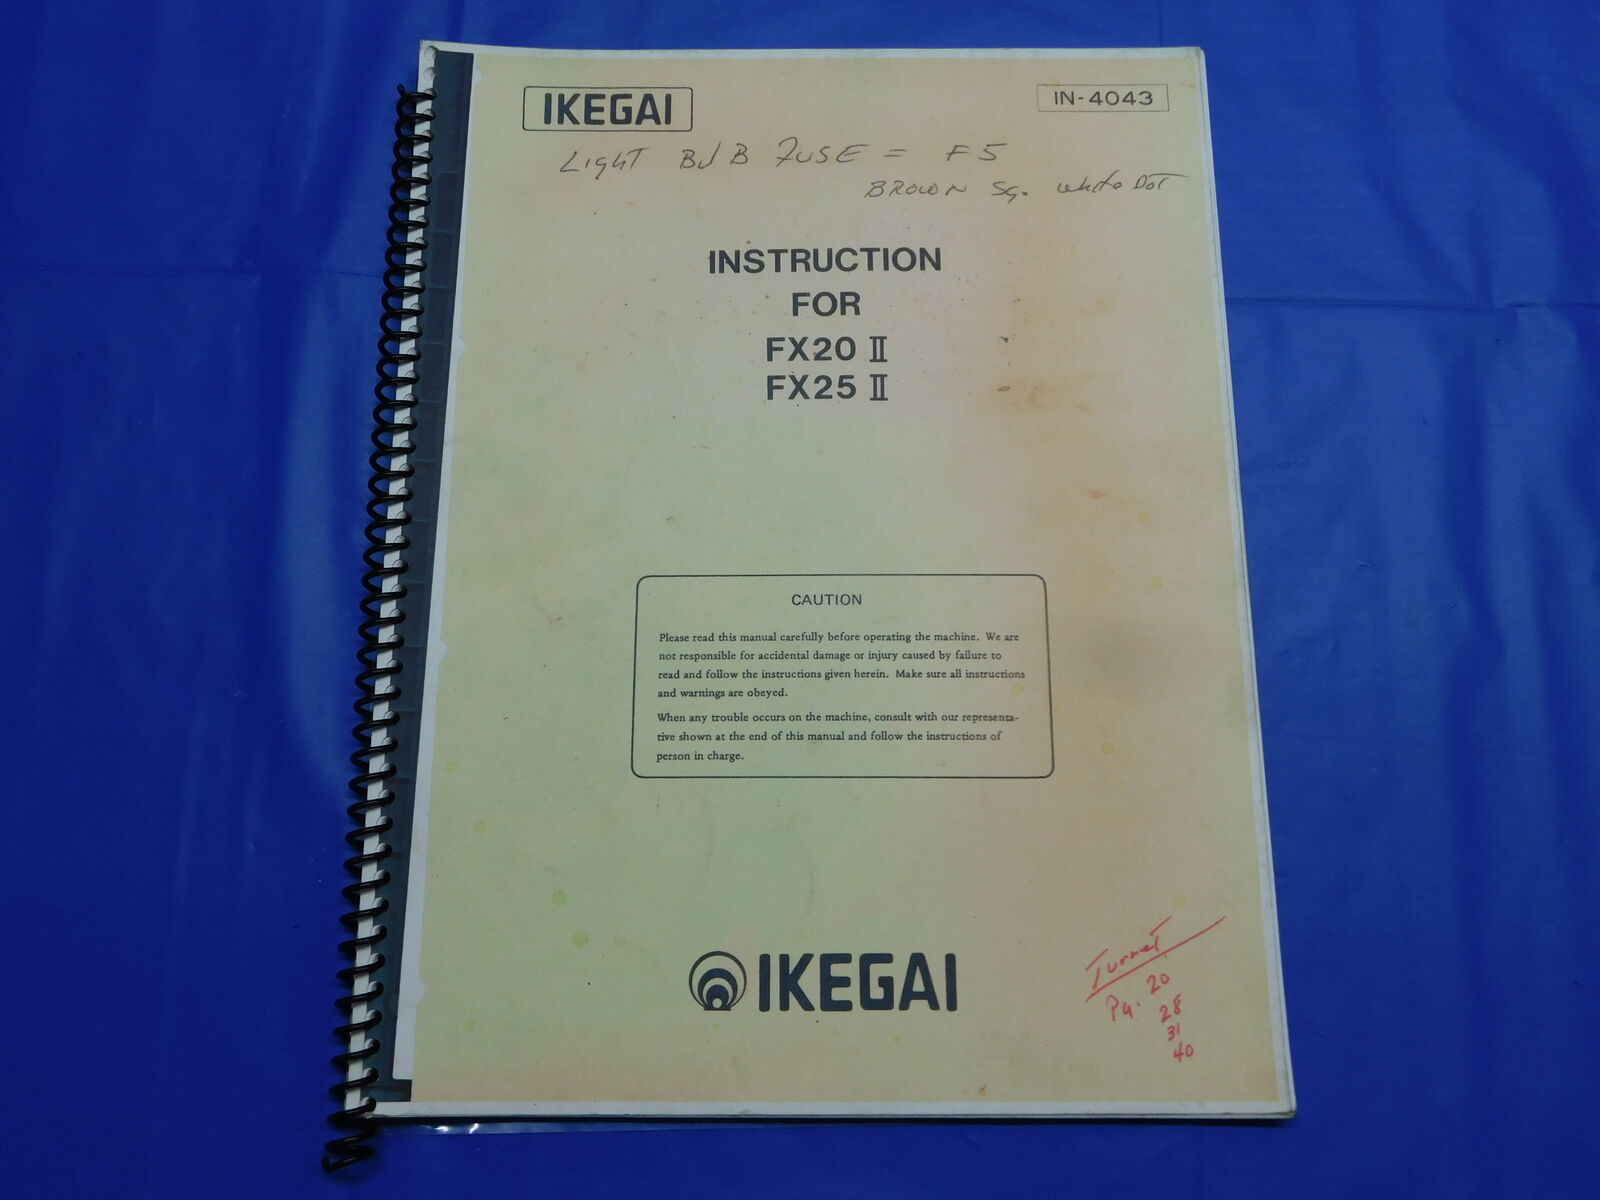 IKEGAI INSTRUCTION MANUAL FX20-2 AND FX25-2 CNC LATHE MACHINES EDITION IN-4043